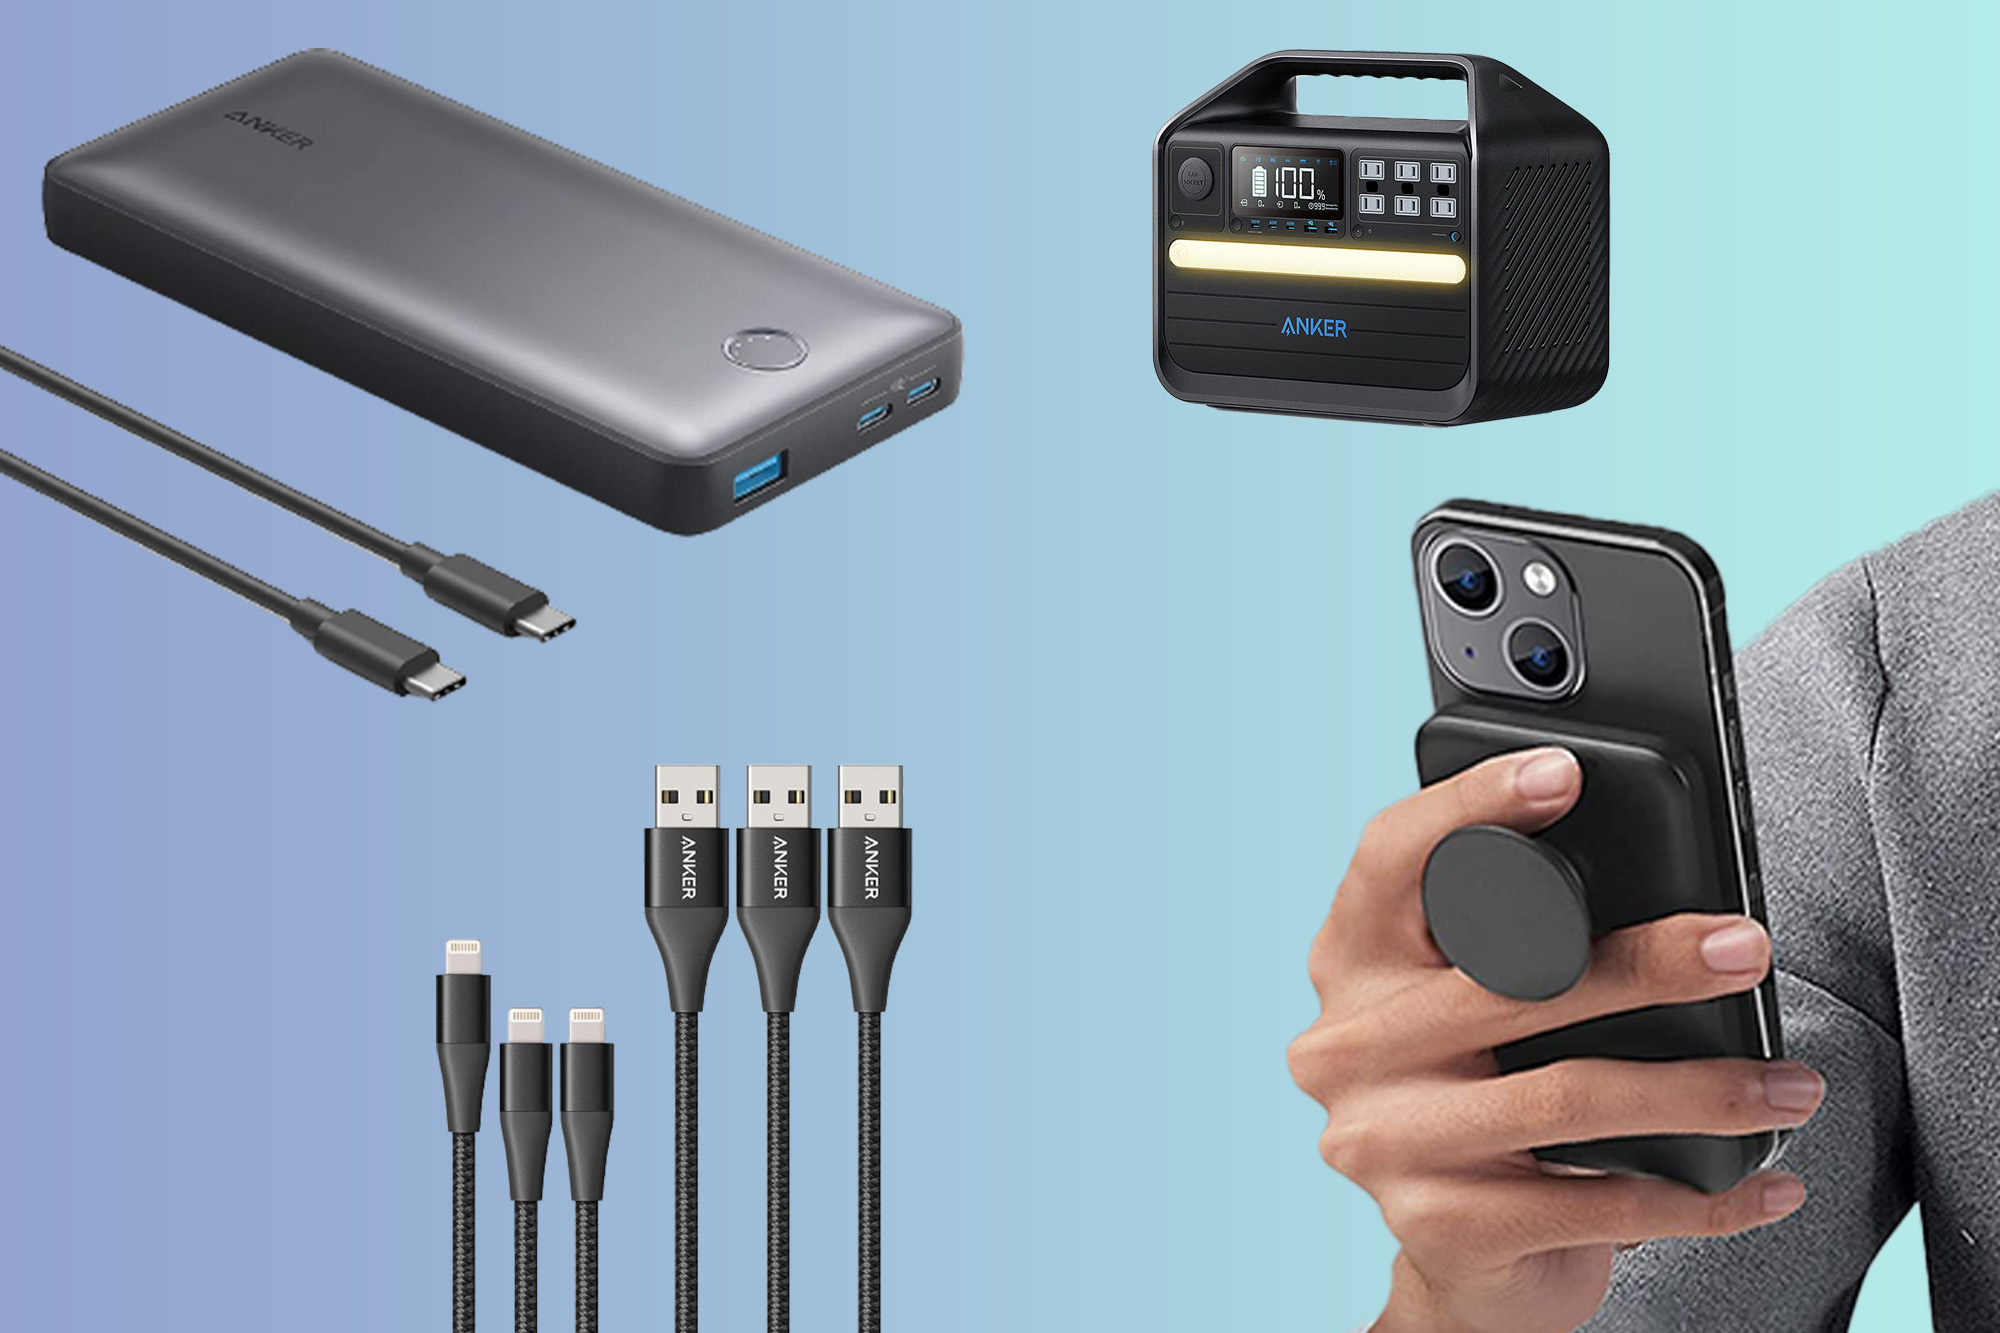 Get amped for the holidays with up to 50% off Anker charging accessories at Amazon